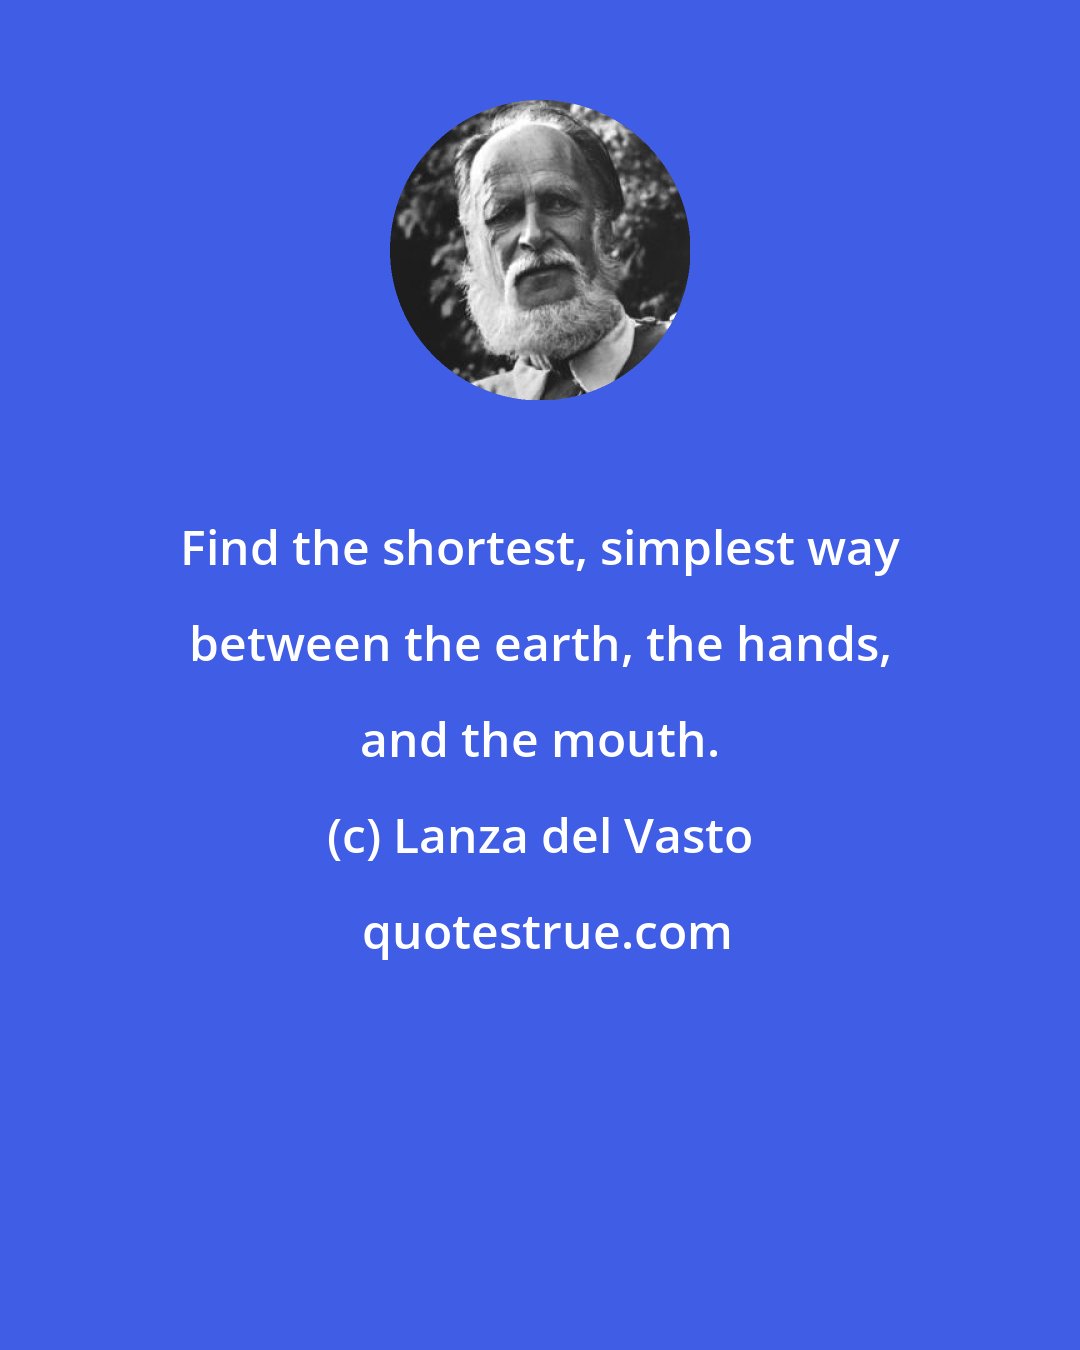 Lanza del Vasto: Find the shortest, simplest way between the earth, the hands, and the mouth.